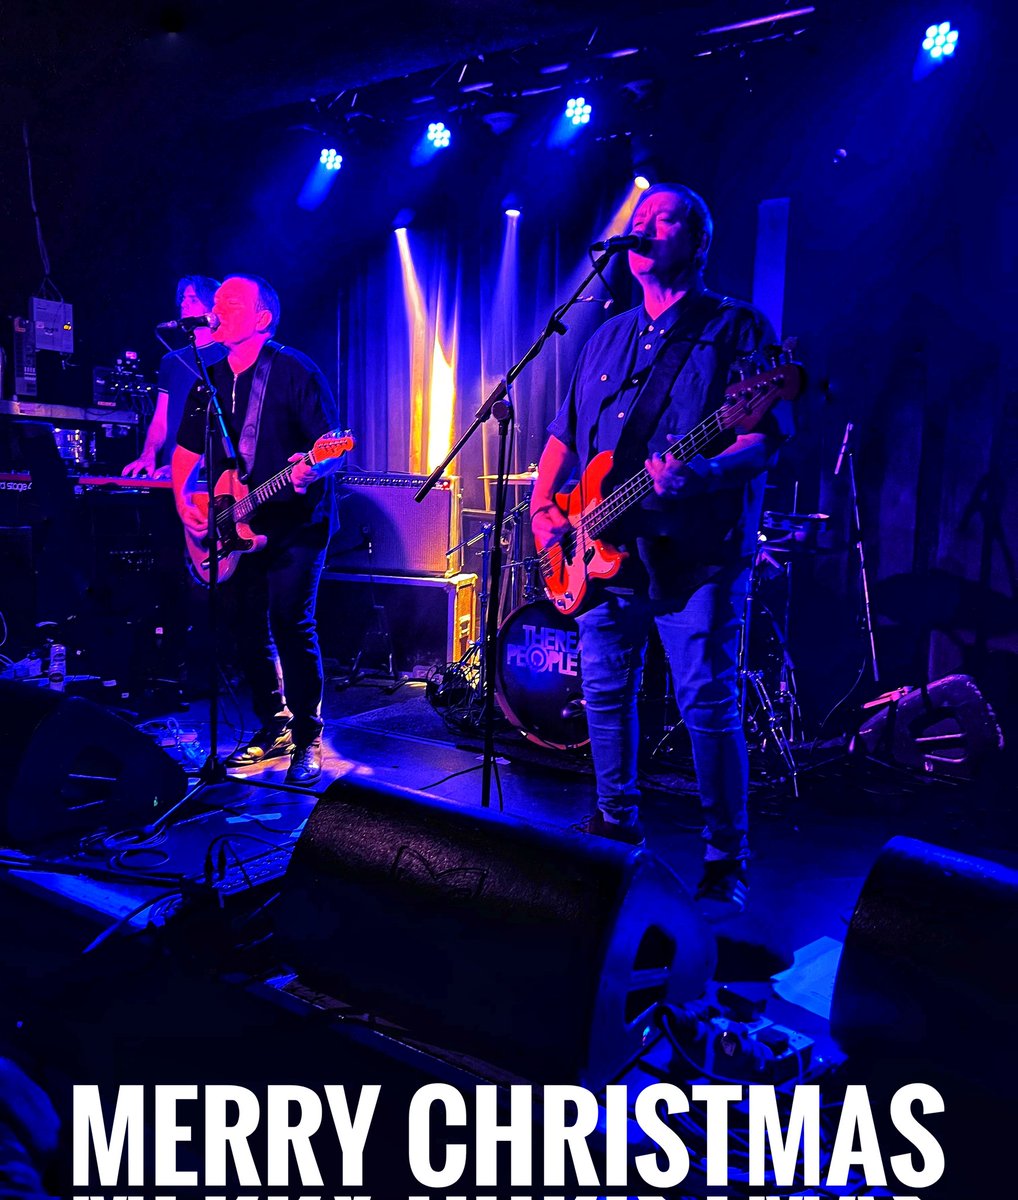 #TheRealPeople Merry Christmas Thank you all for Coming to see us this year on our #35thAnniversary Tour See You All Next Year.